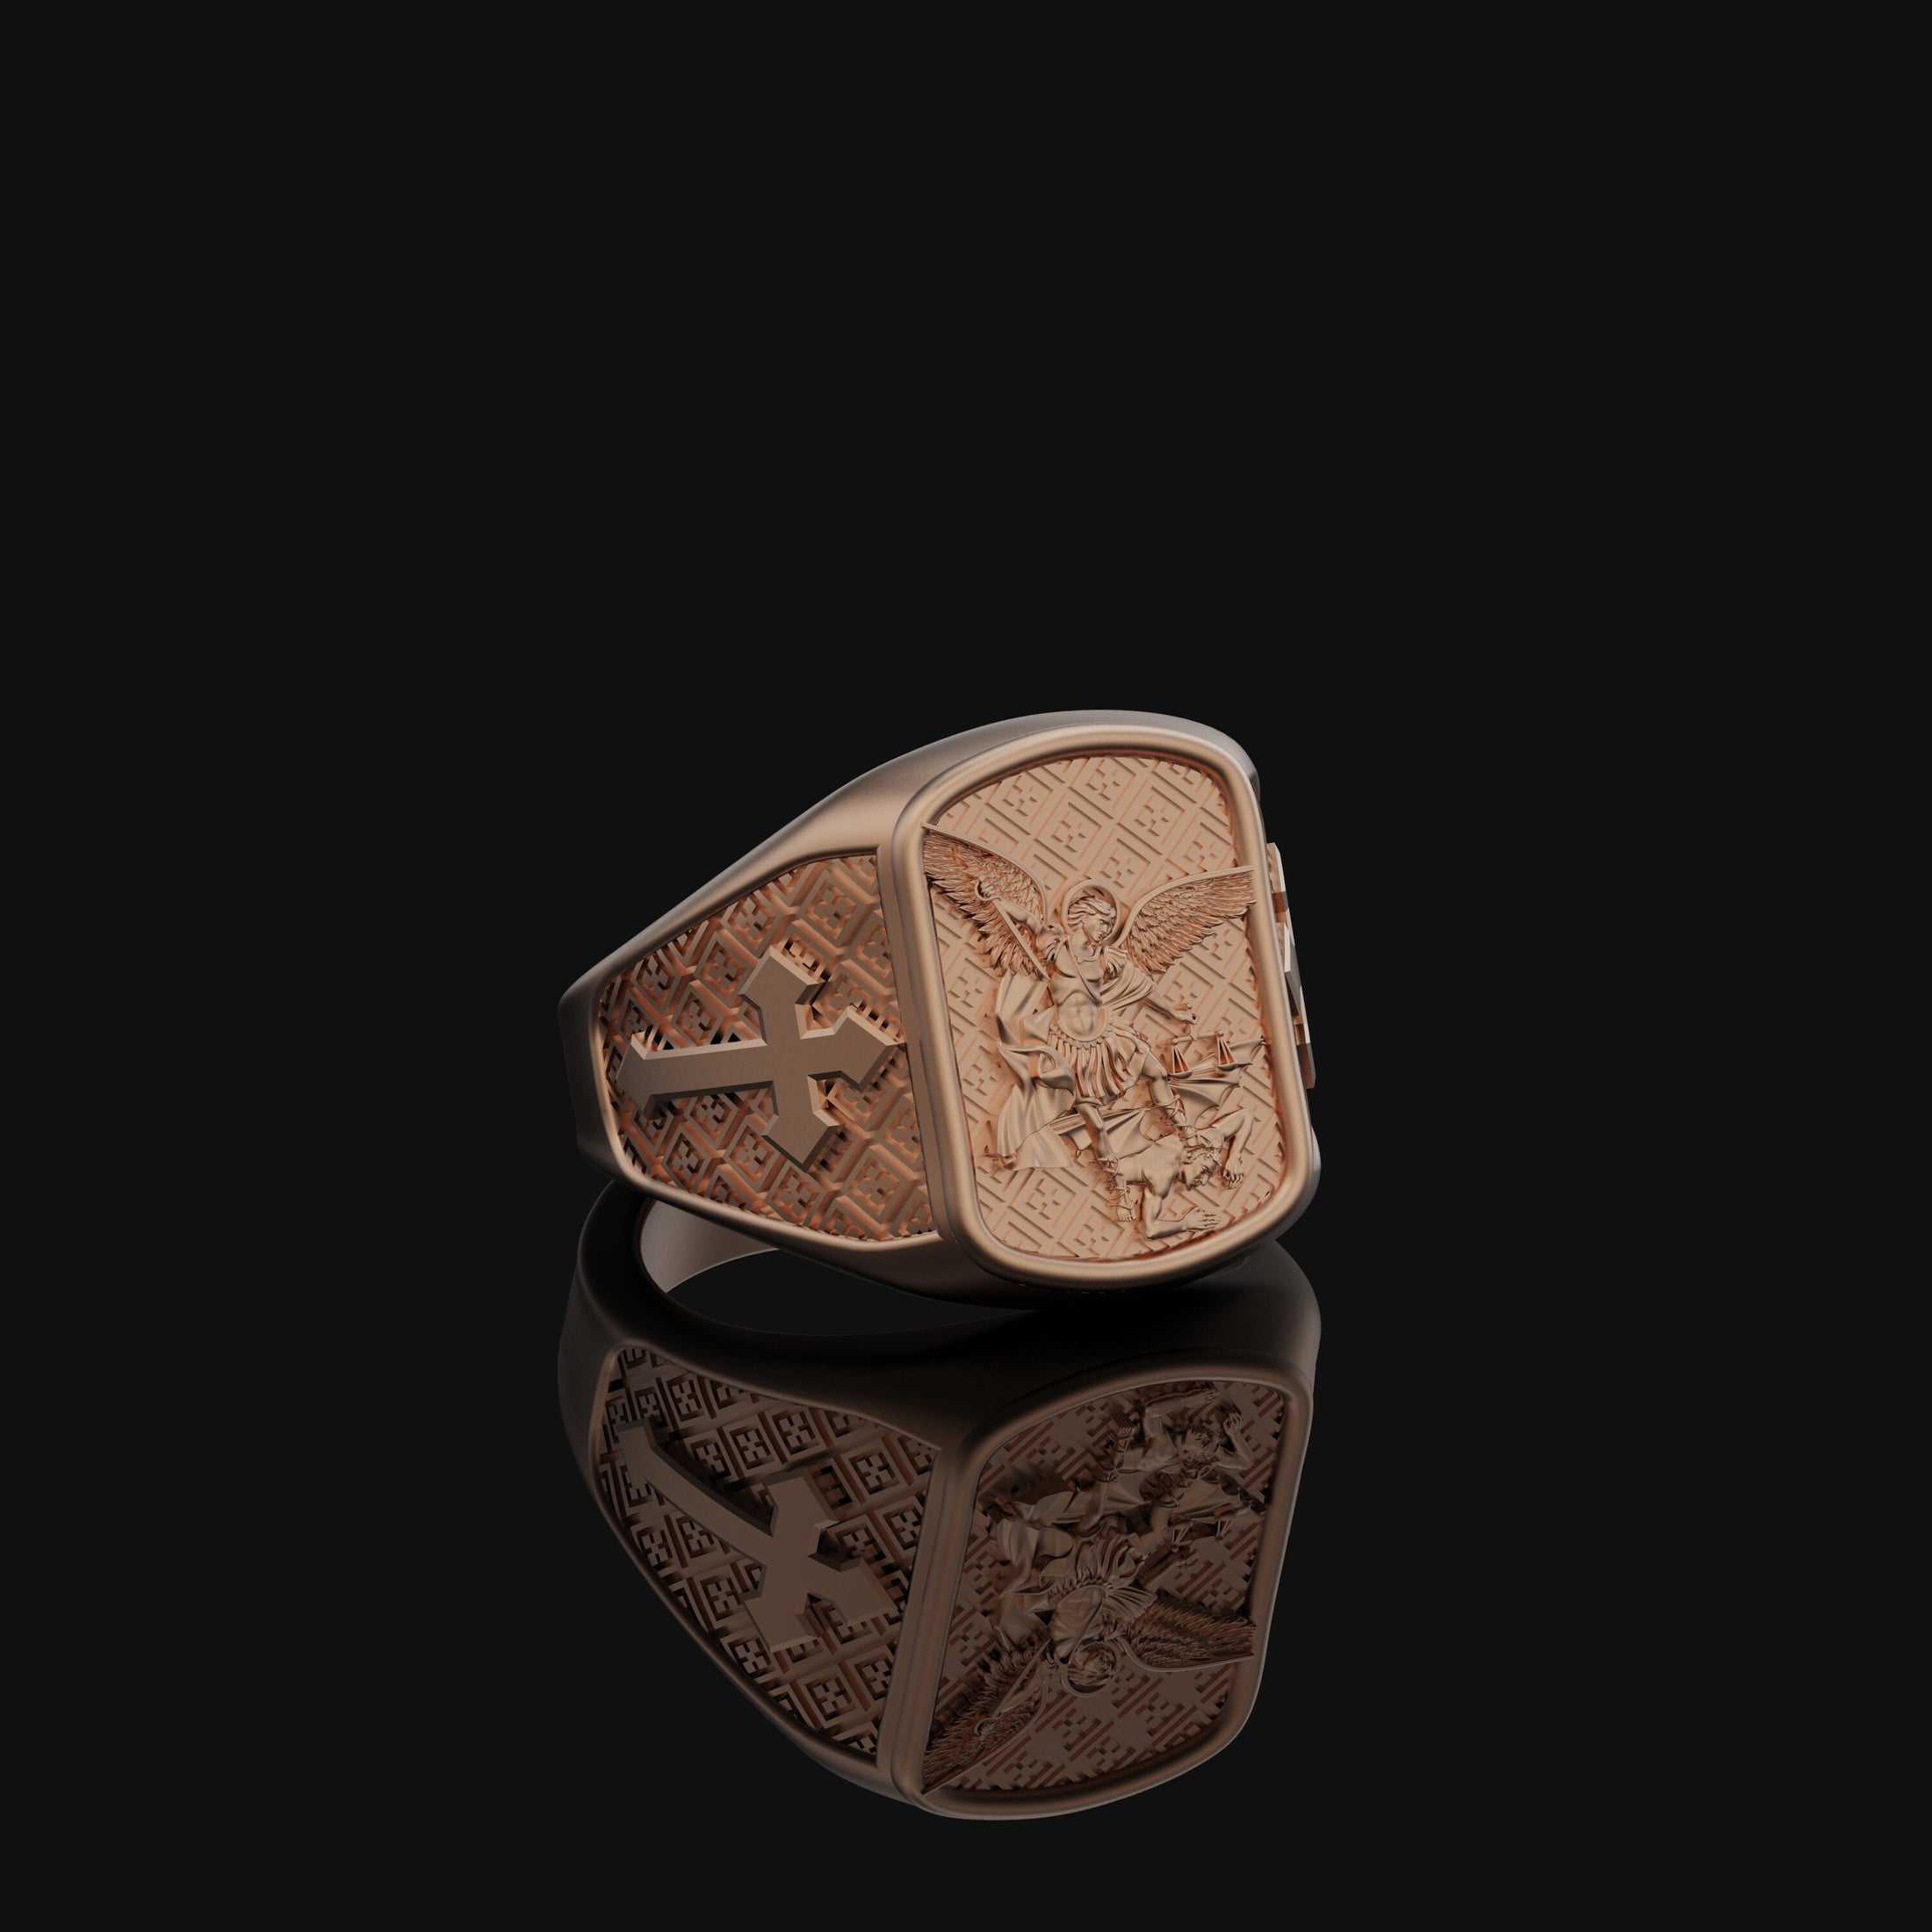 Archangel Michael Conquers Evil Silver Ring, Men's Cross Motif Band, Spiritual Christian Jewelry, Gift of Divine Protection Rose Gold Finish